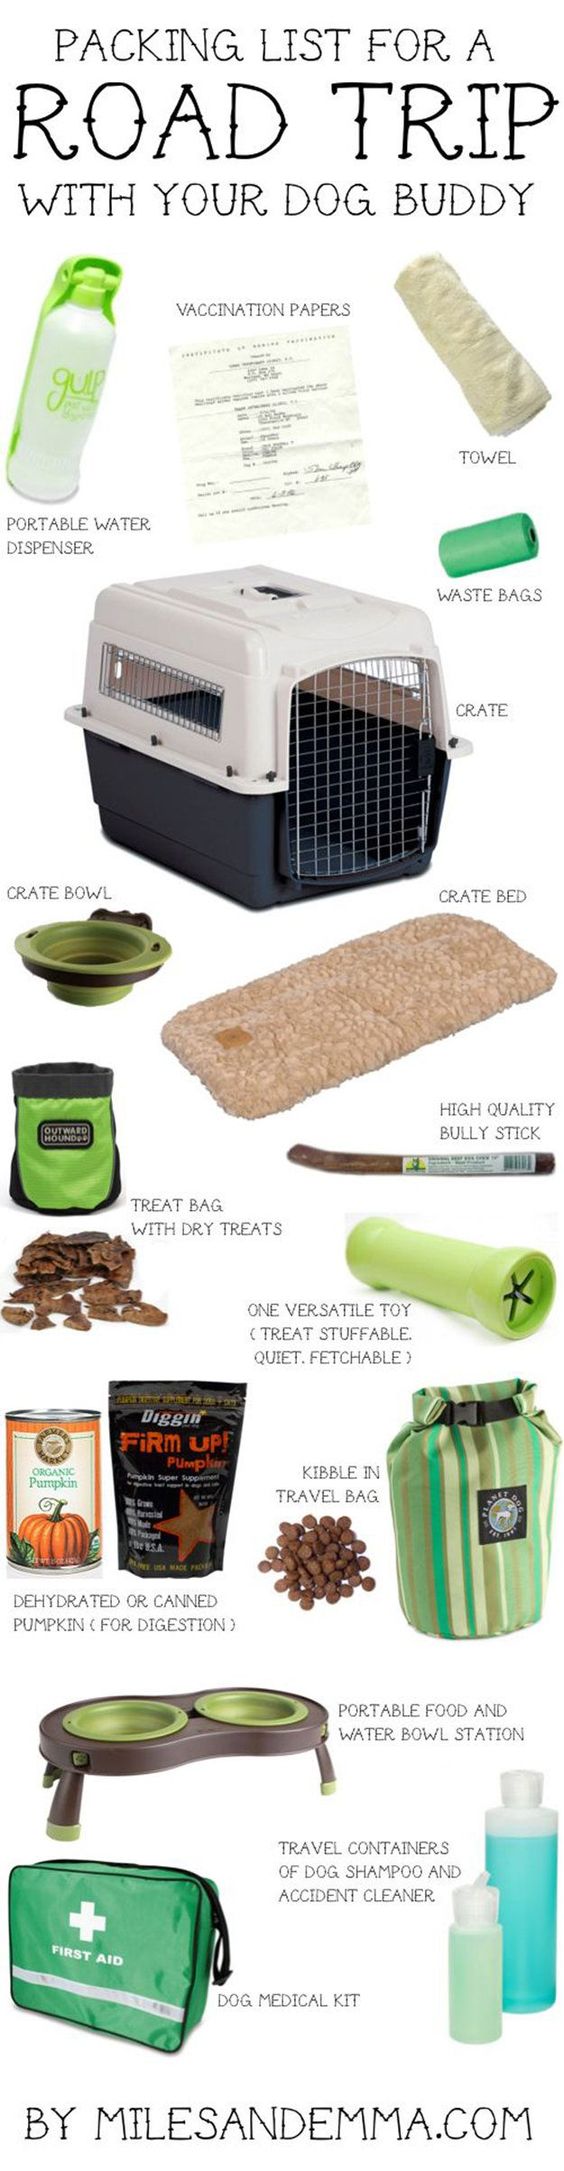 DIY Road Trip Ideas For Your Pet -- rest of the list is about other DIY road trippy stuff, but this image is a good reminder of some basics and suggests some cool-looking products that I think I want to look into for the kids